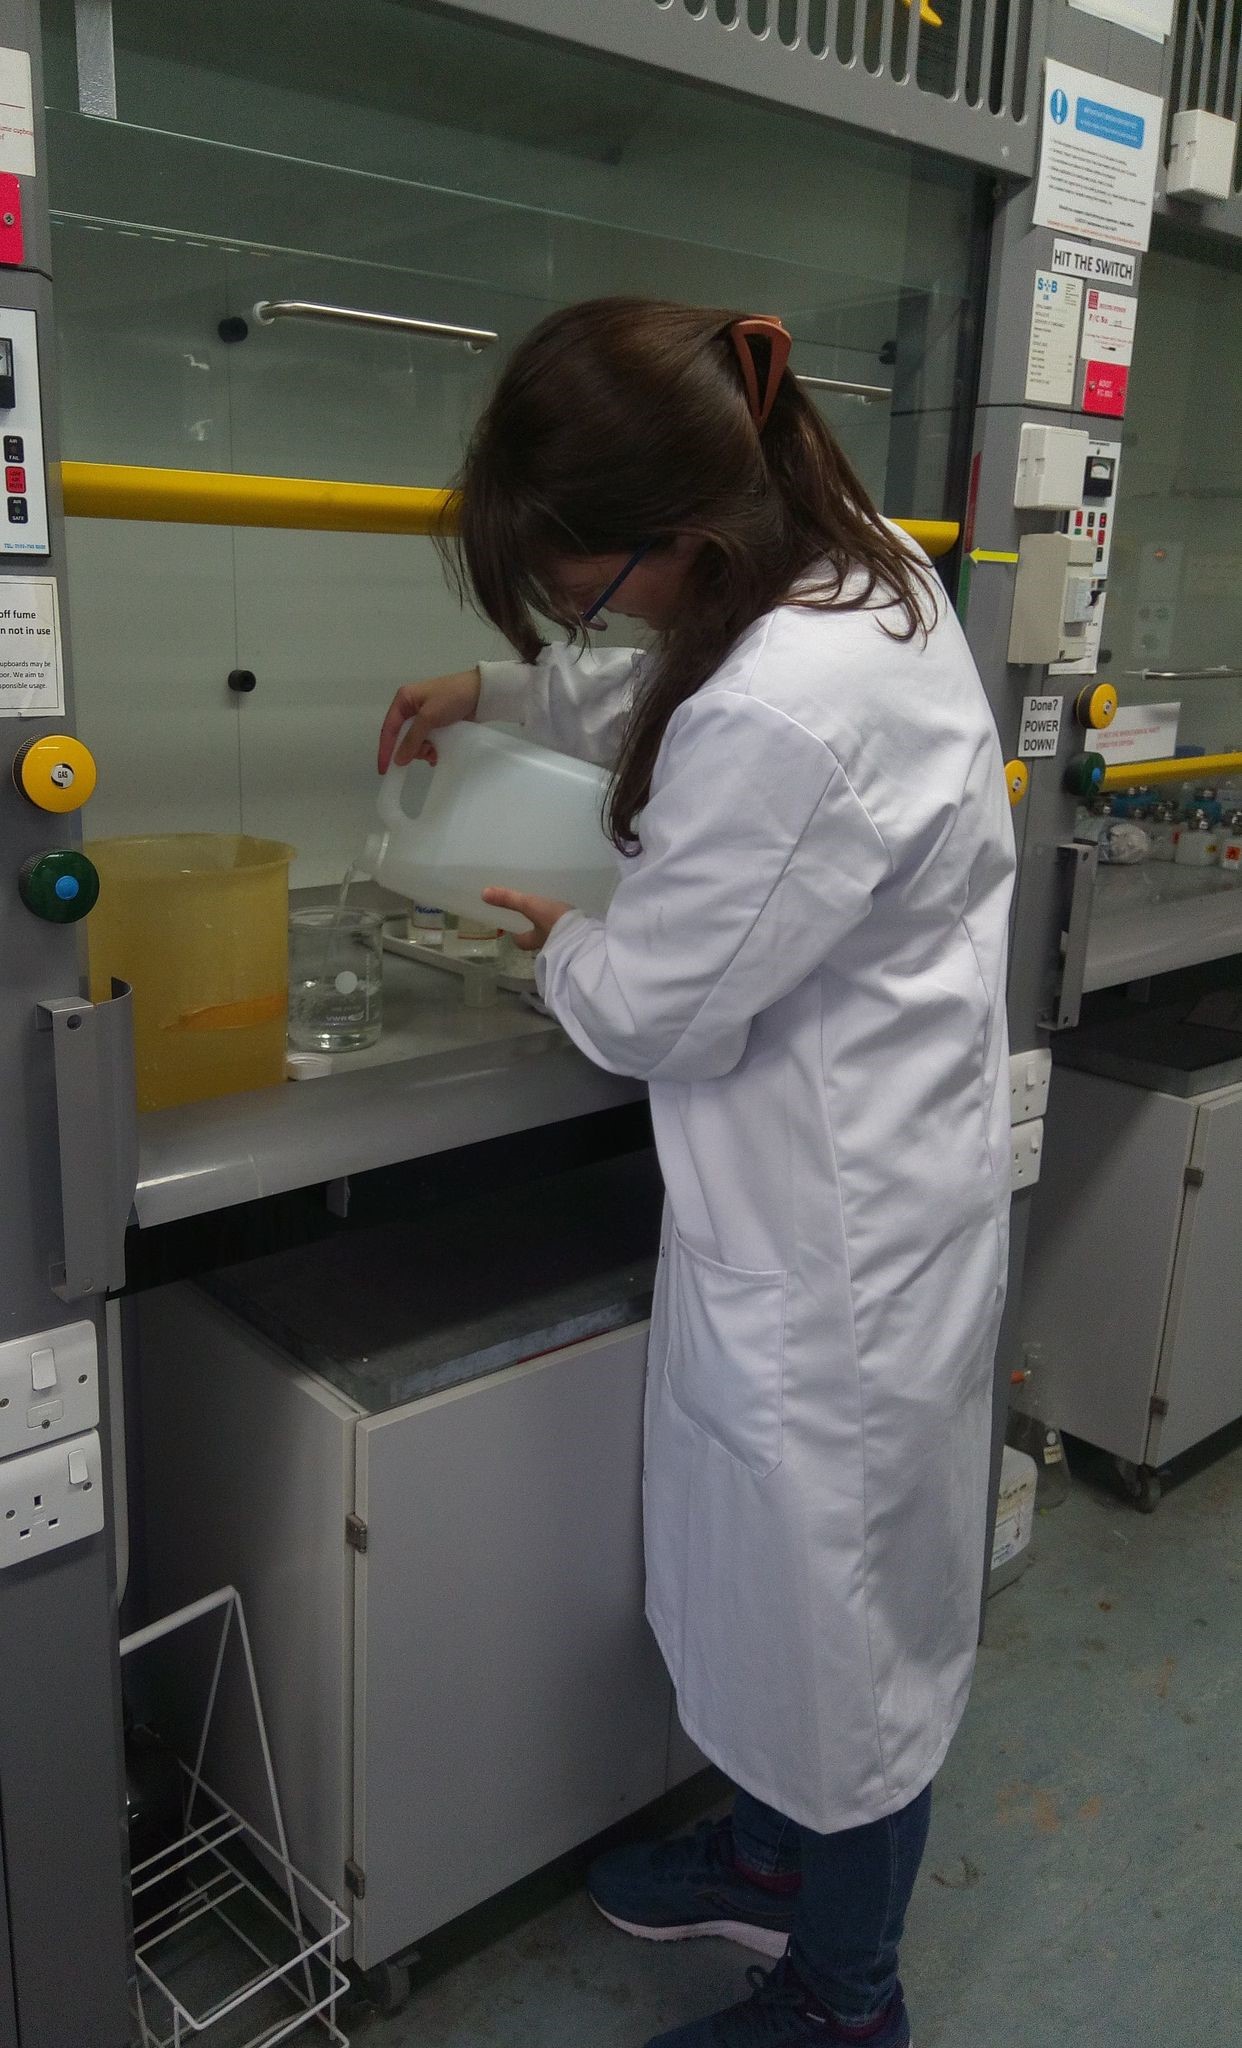 A woman with long brown hair in a white coat pours a liquid into a glass container standing on an electric balance inside a fume cupboard.